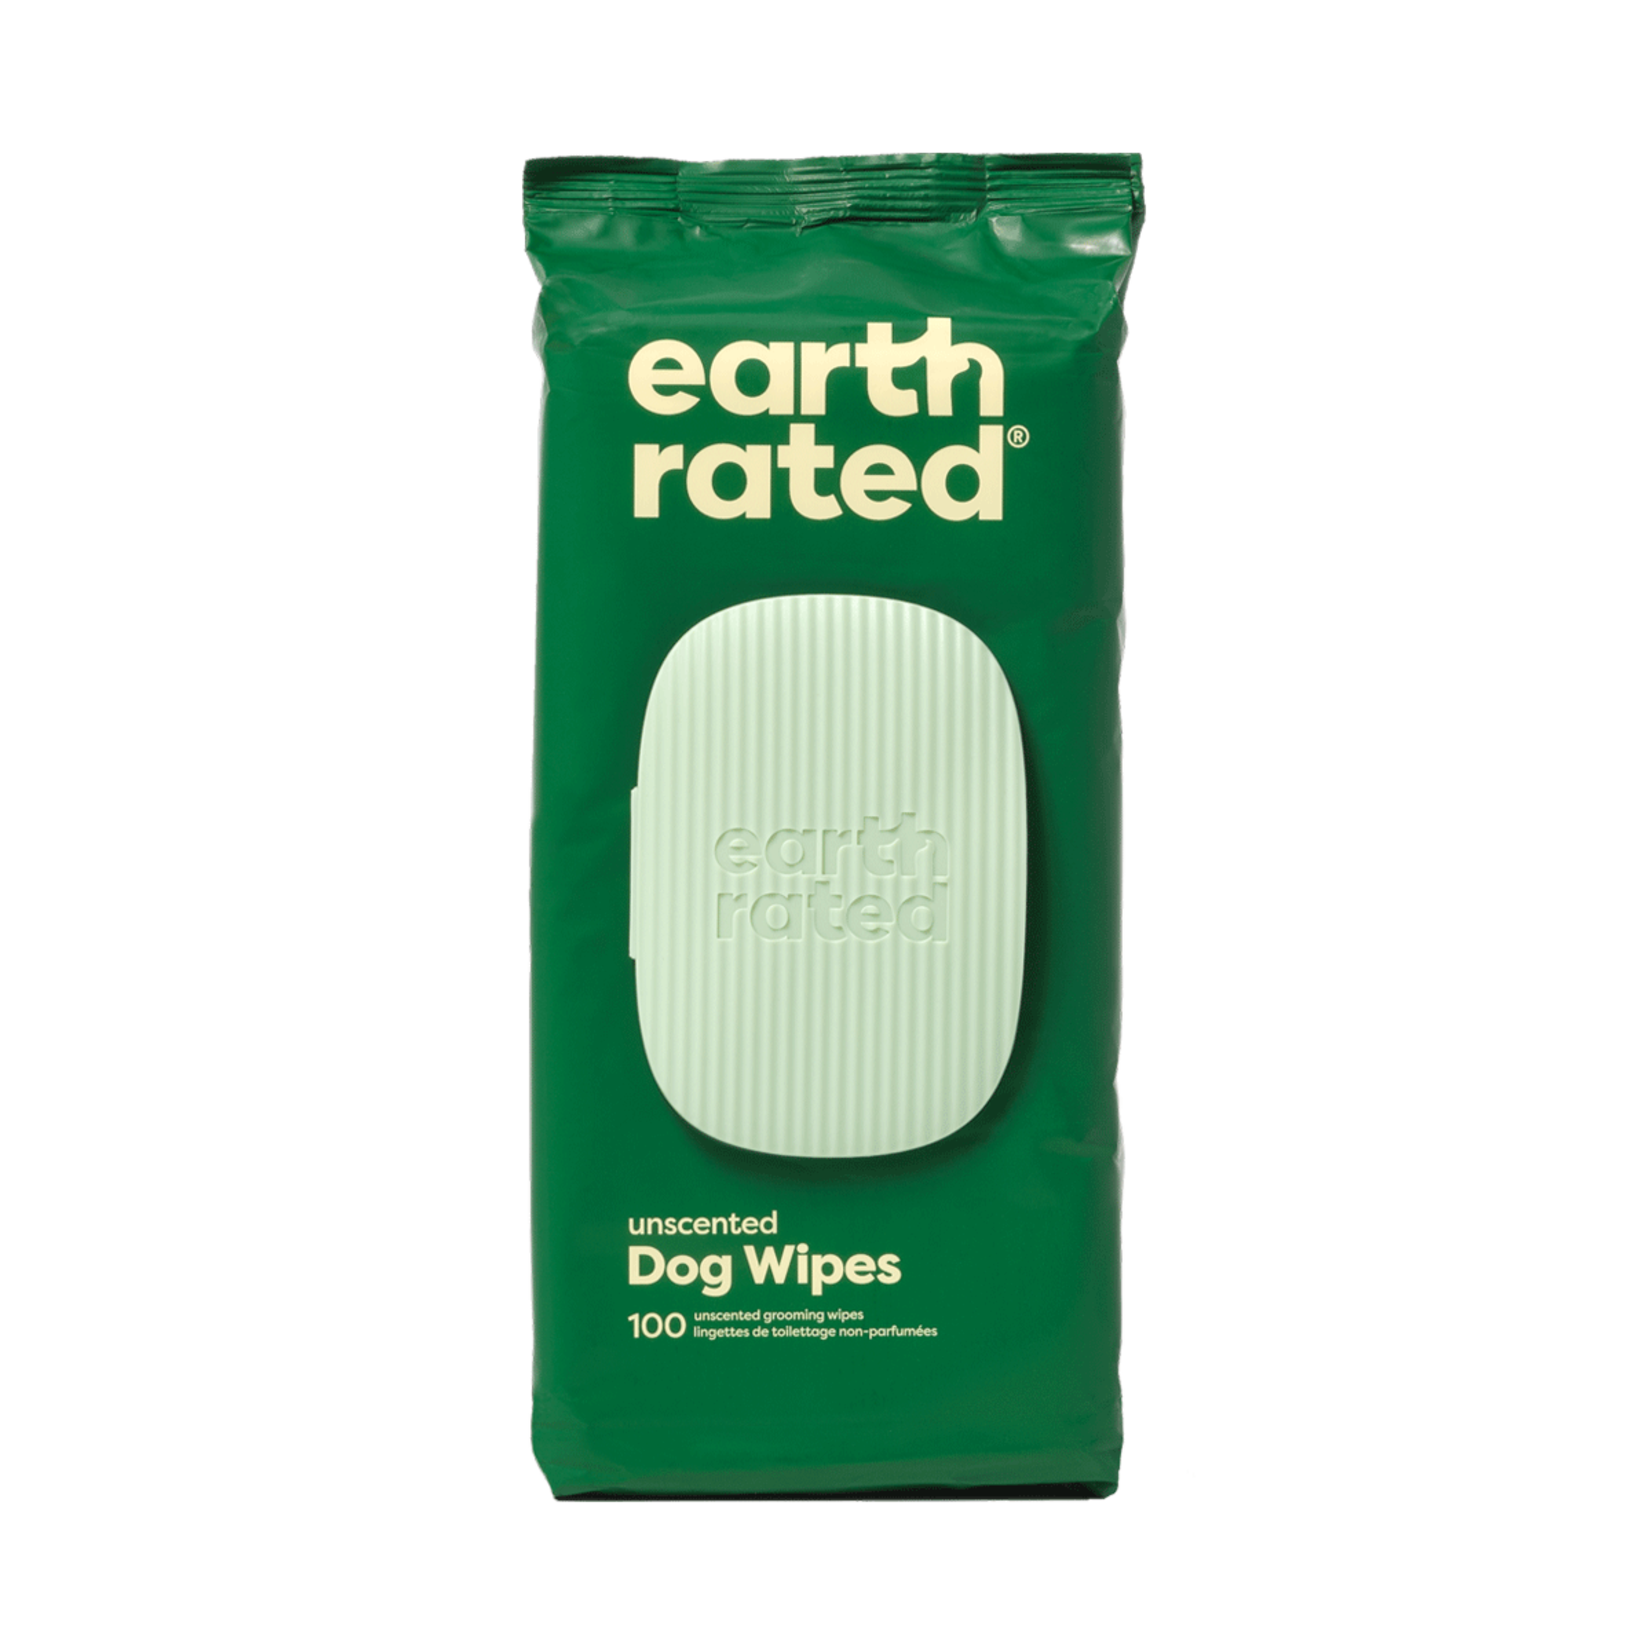 Earth Rated Plant-Based Dog Grooming Wipes - Unscented